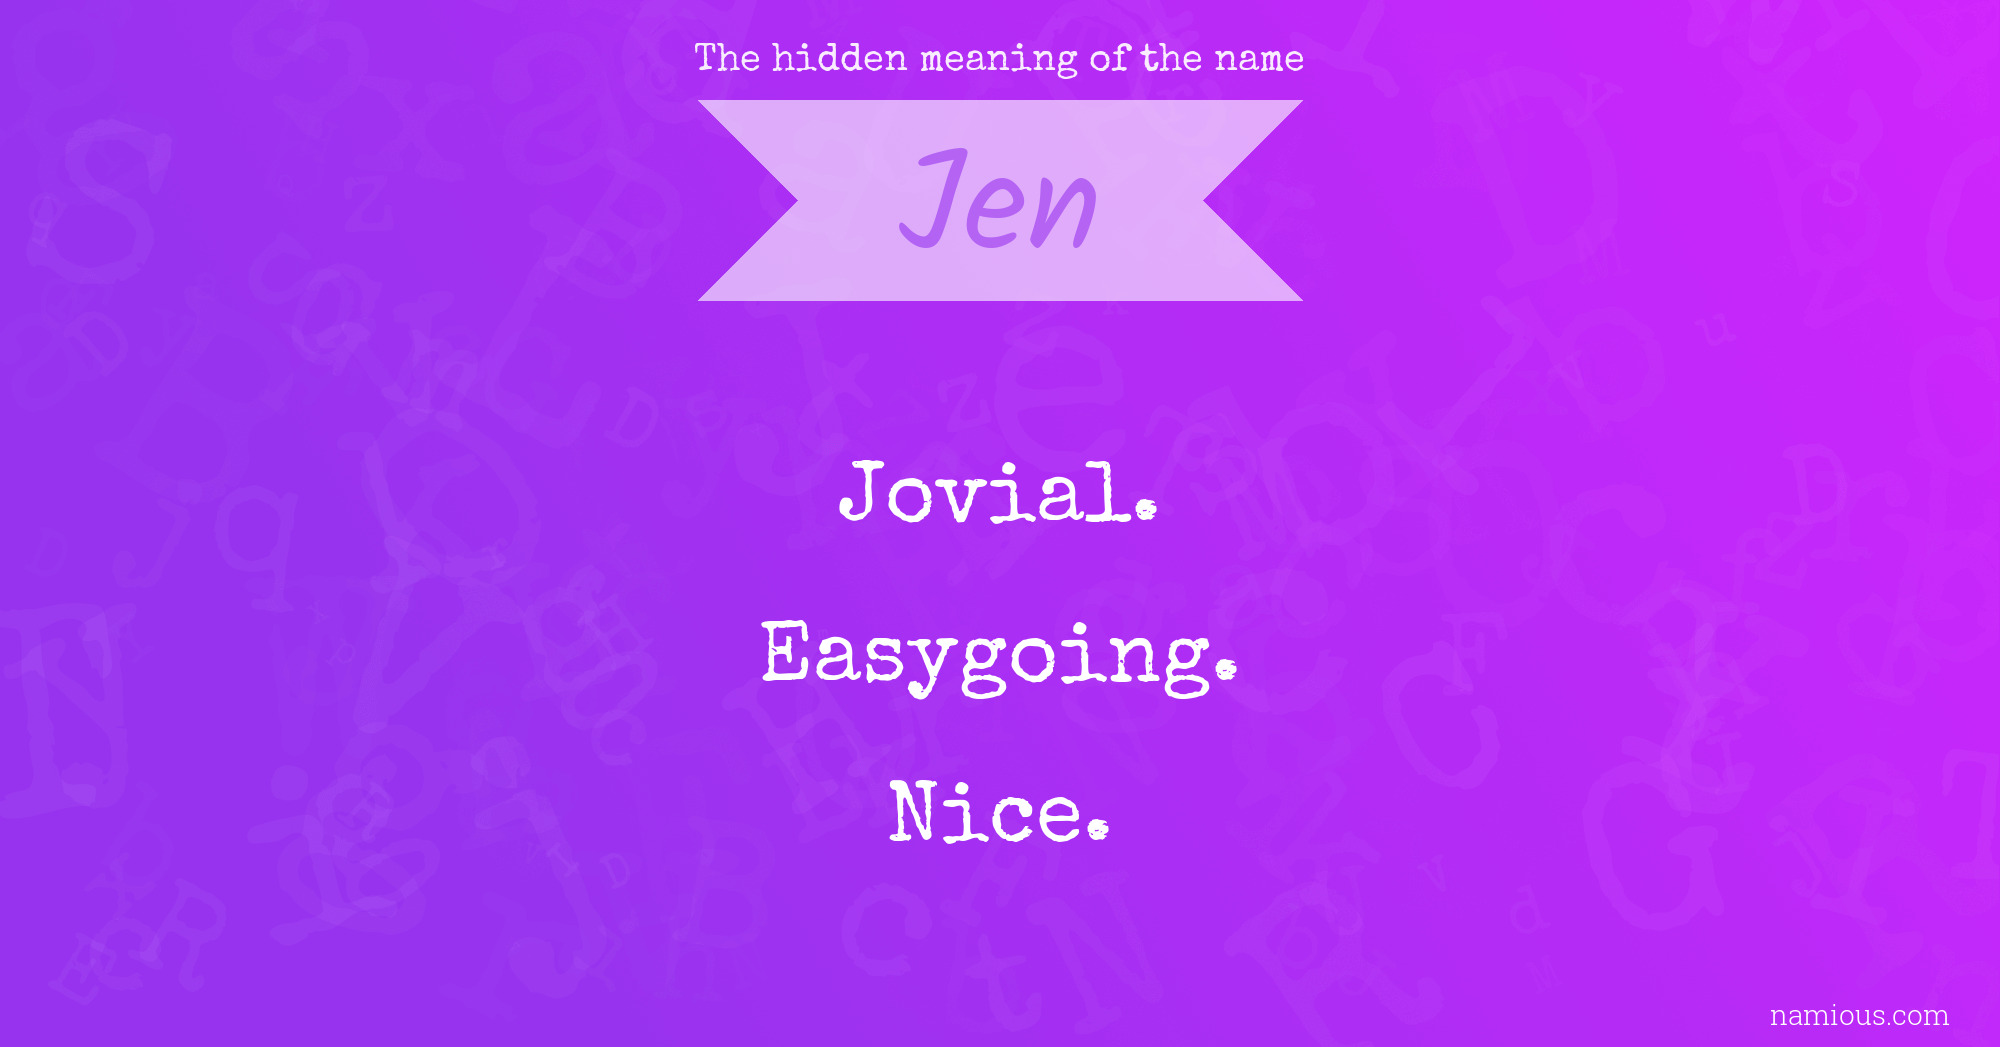 The hidden meaning of the name Jen